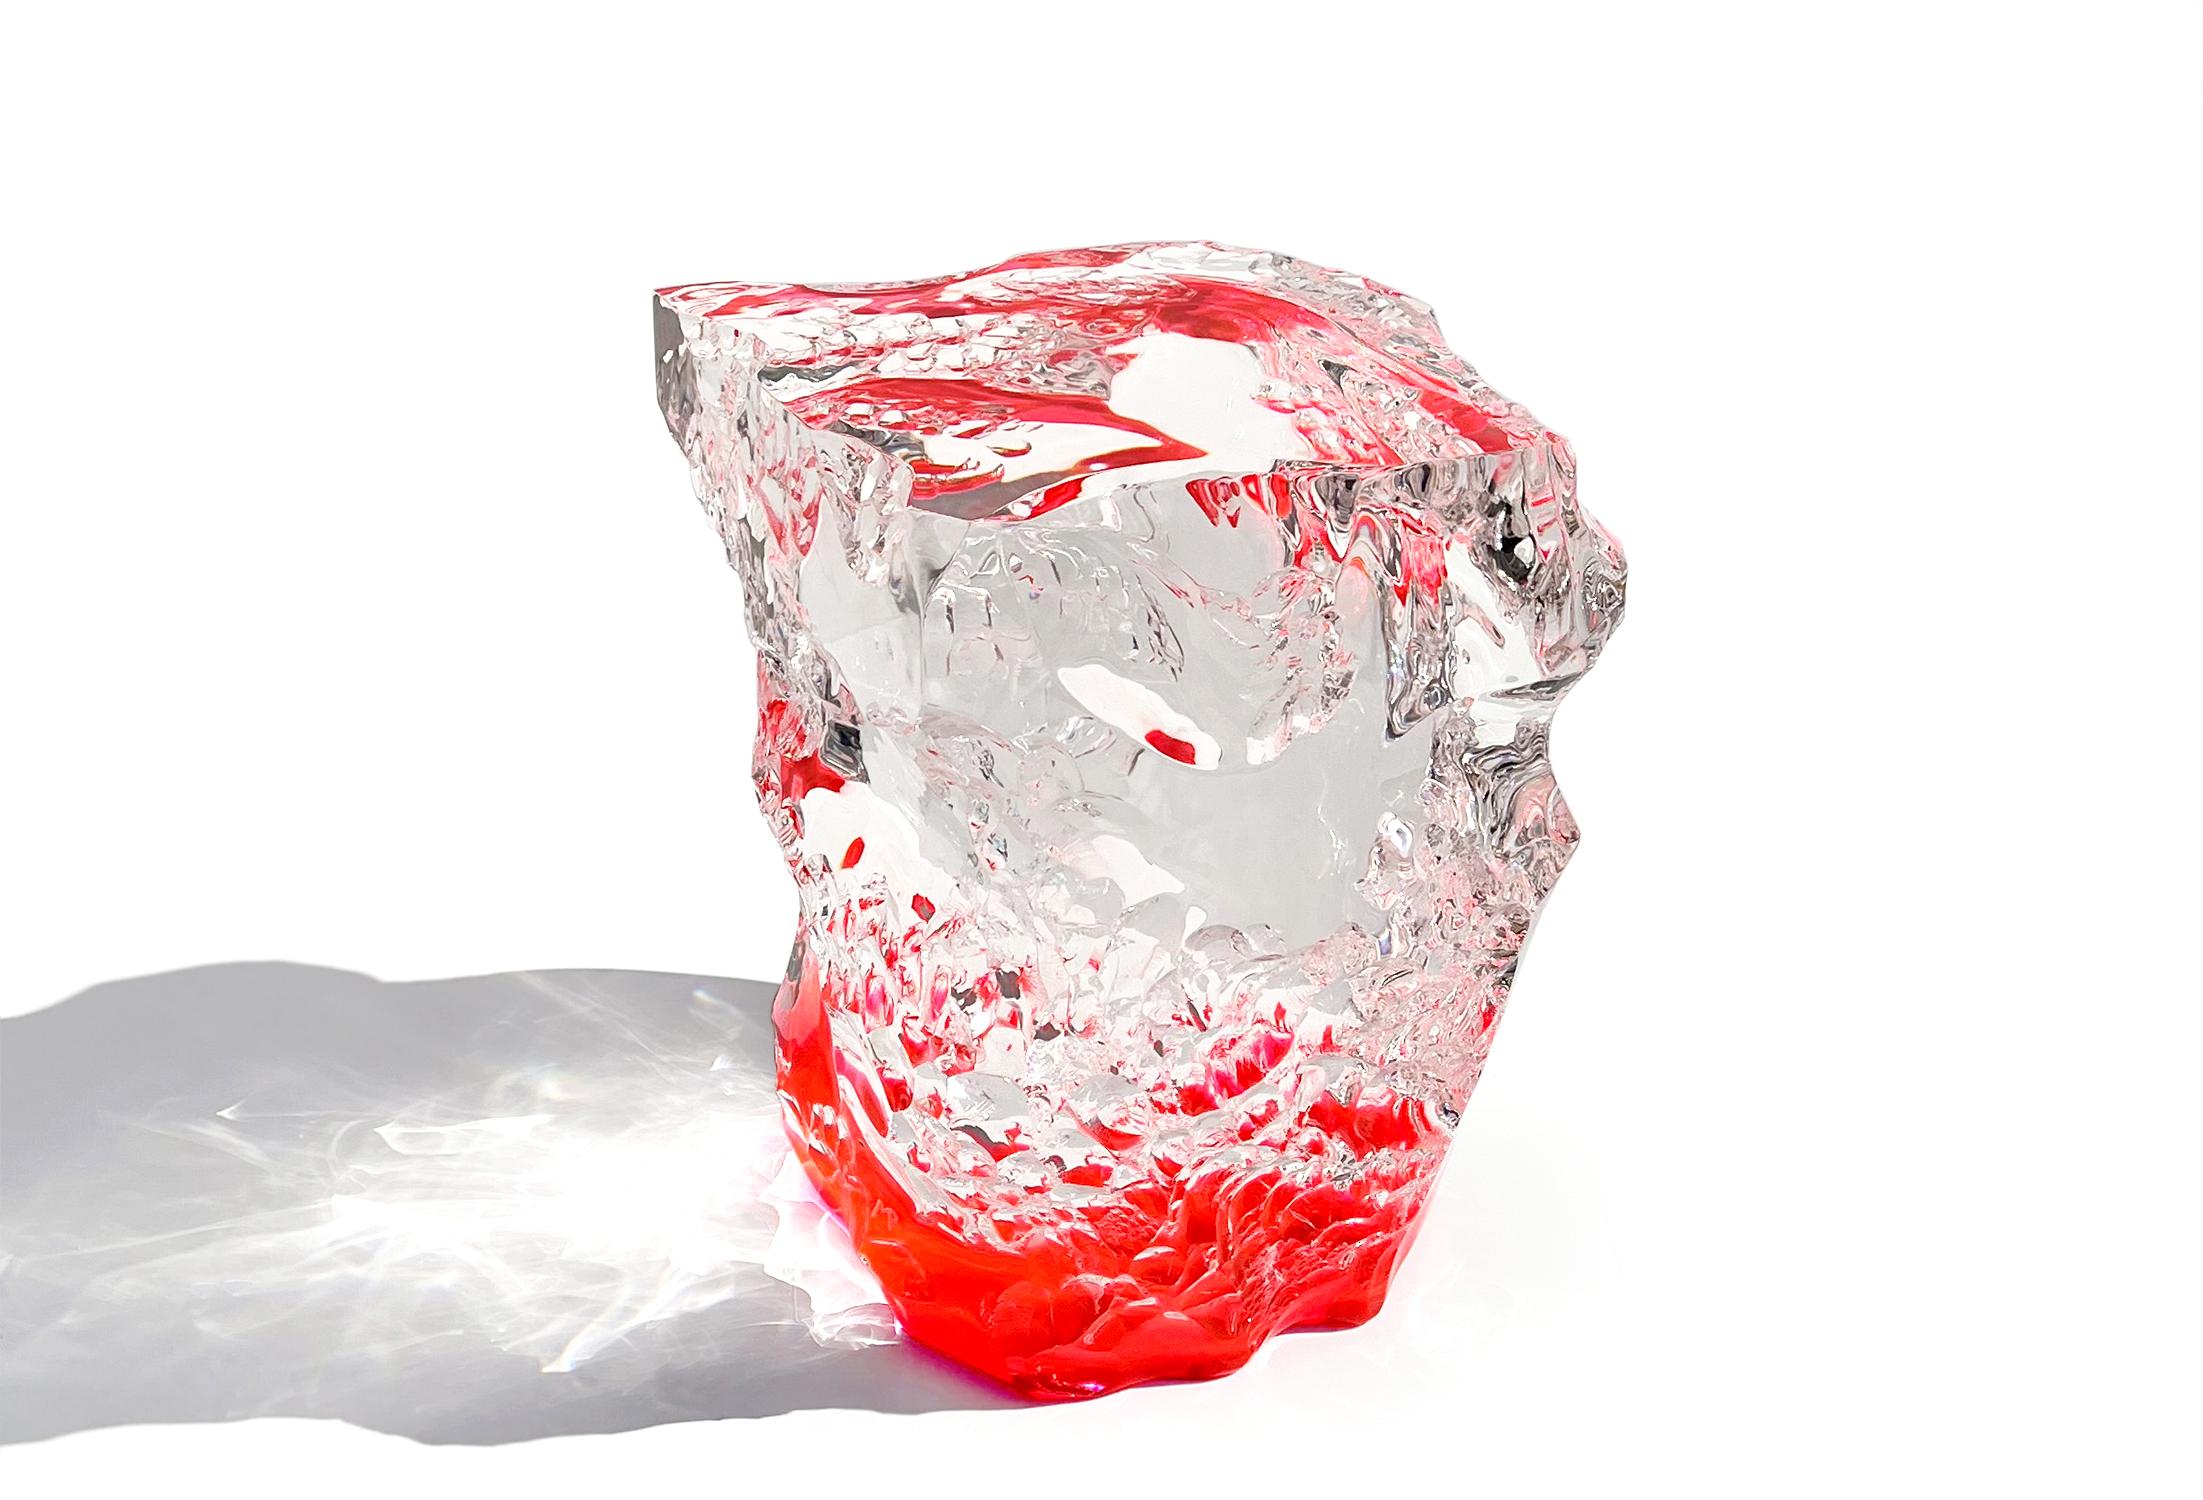 Coffee table Molecula designed by Marco Pettinari for Superego Editions. 
This sculpture/coffee table made from a transparent Plexiglas block, it made by hand and with numerical control machinery. 
Glossy fluorescent red colour.

Superego